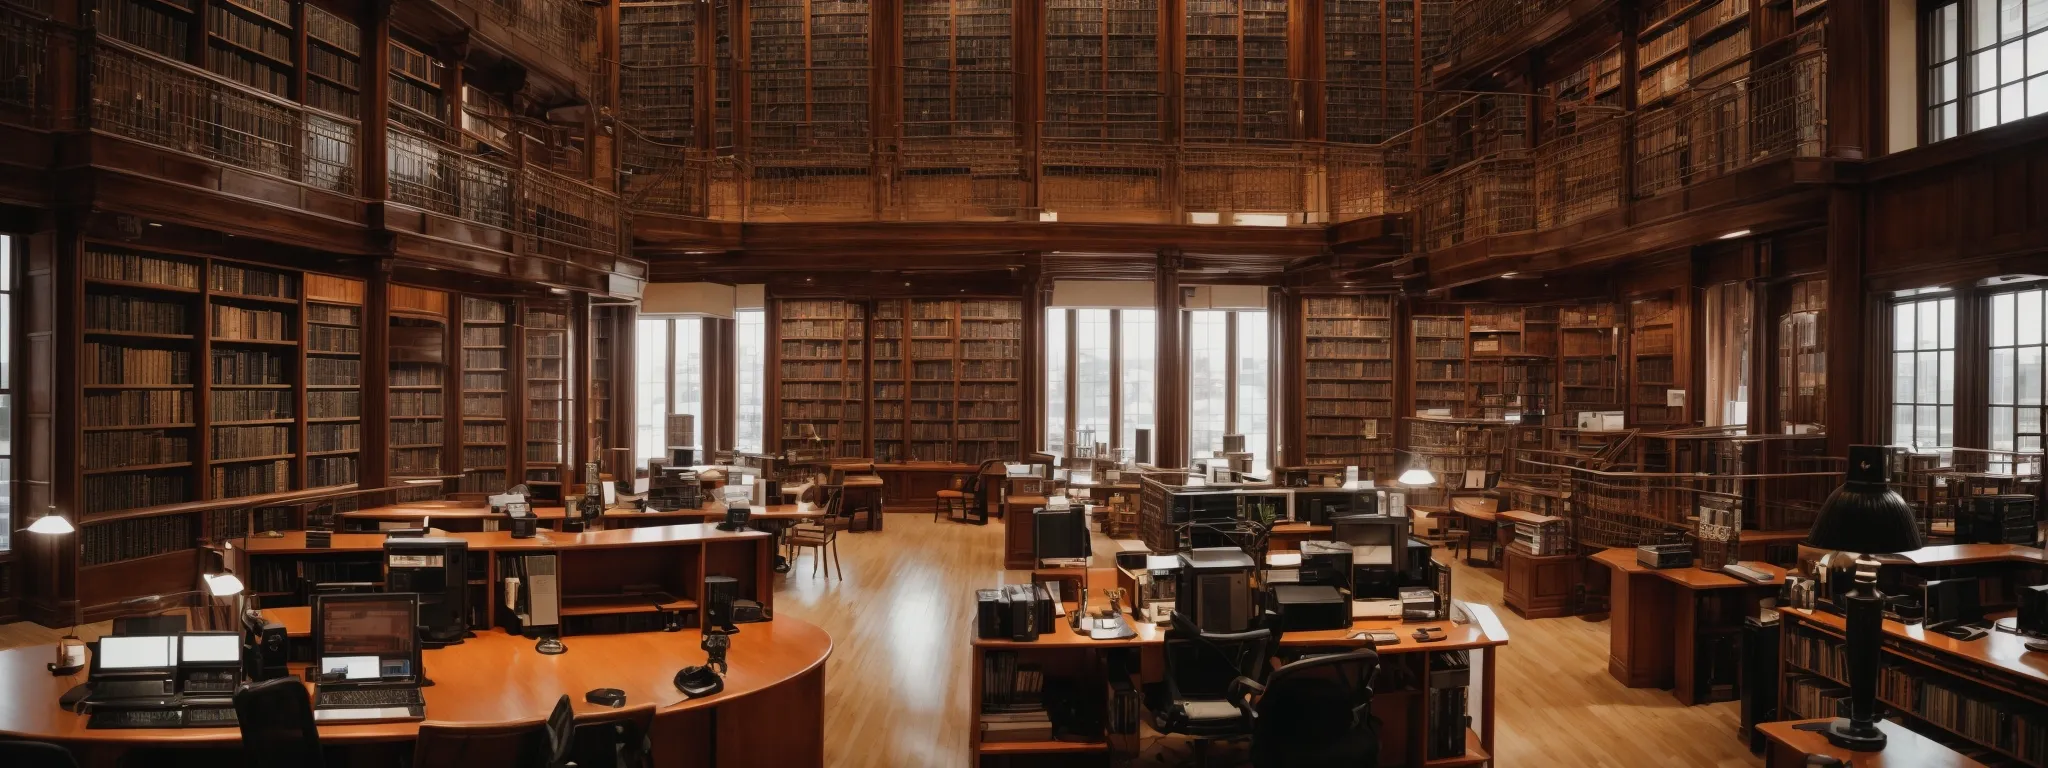 a panorama of an expansive library with towering bookshelves and a central computer station signifying the pursuit of seo strategies through research and data analysis.